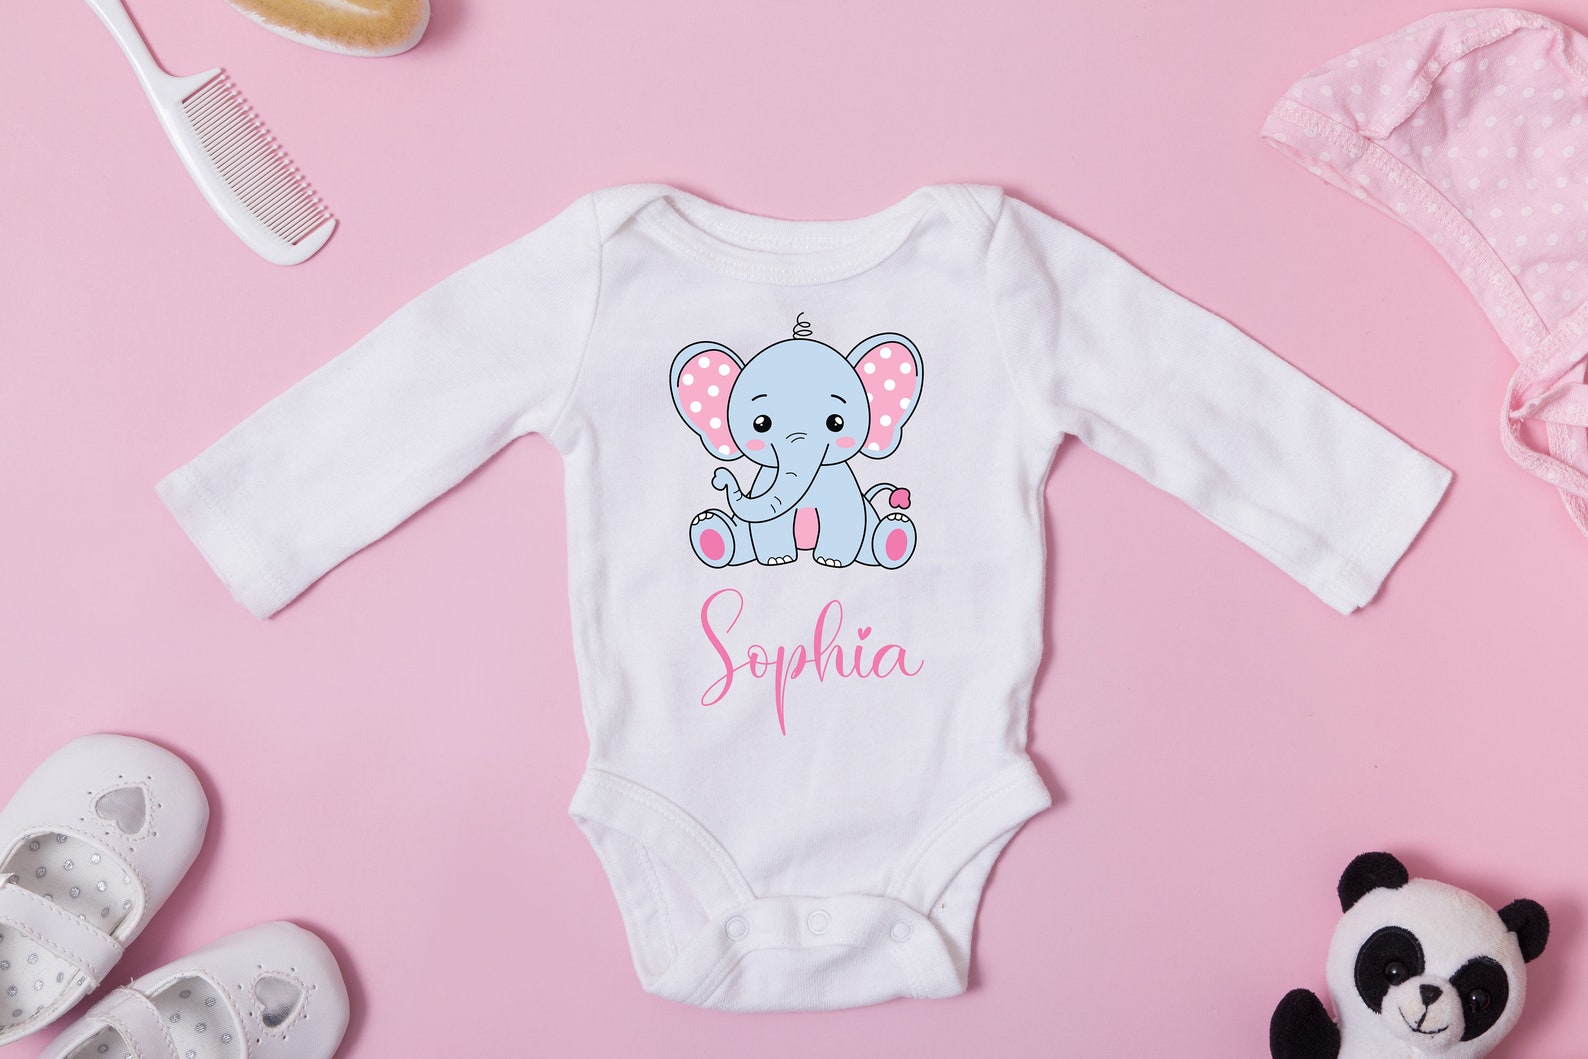 Cute girly design with little elephant.